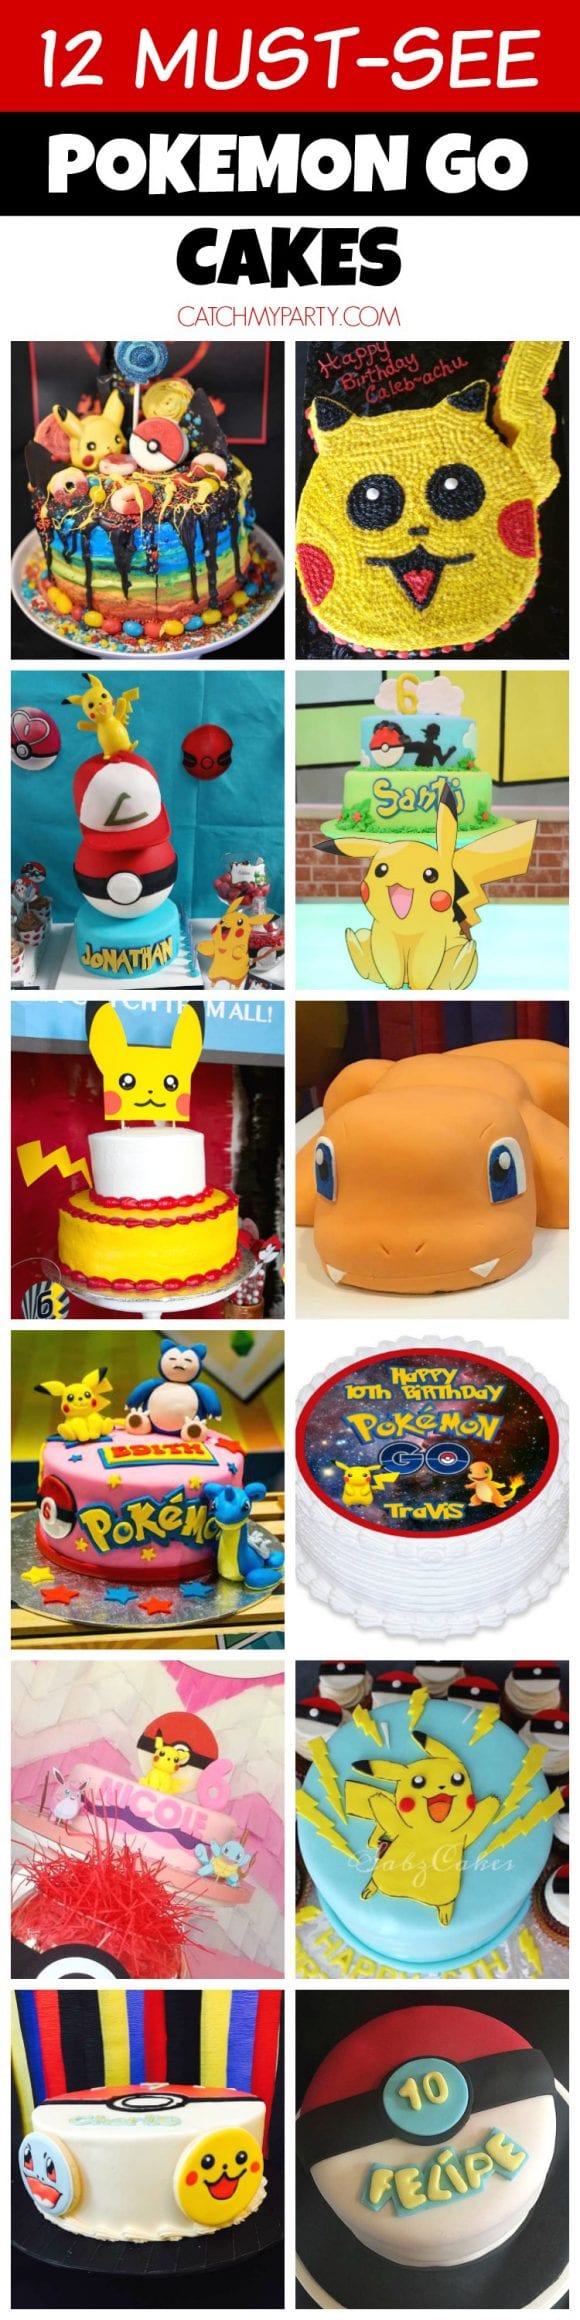 12 Must-See Pokemon Go Cakes | CatchMyParty.com